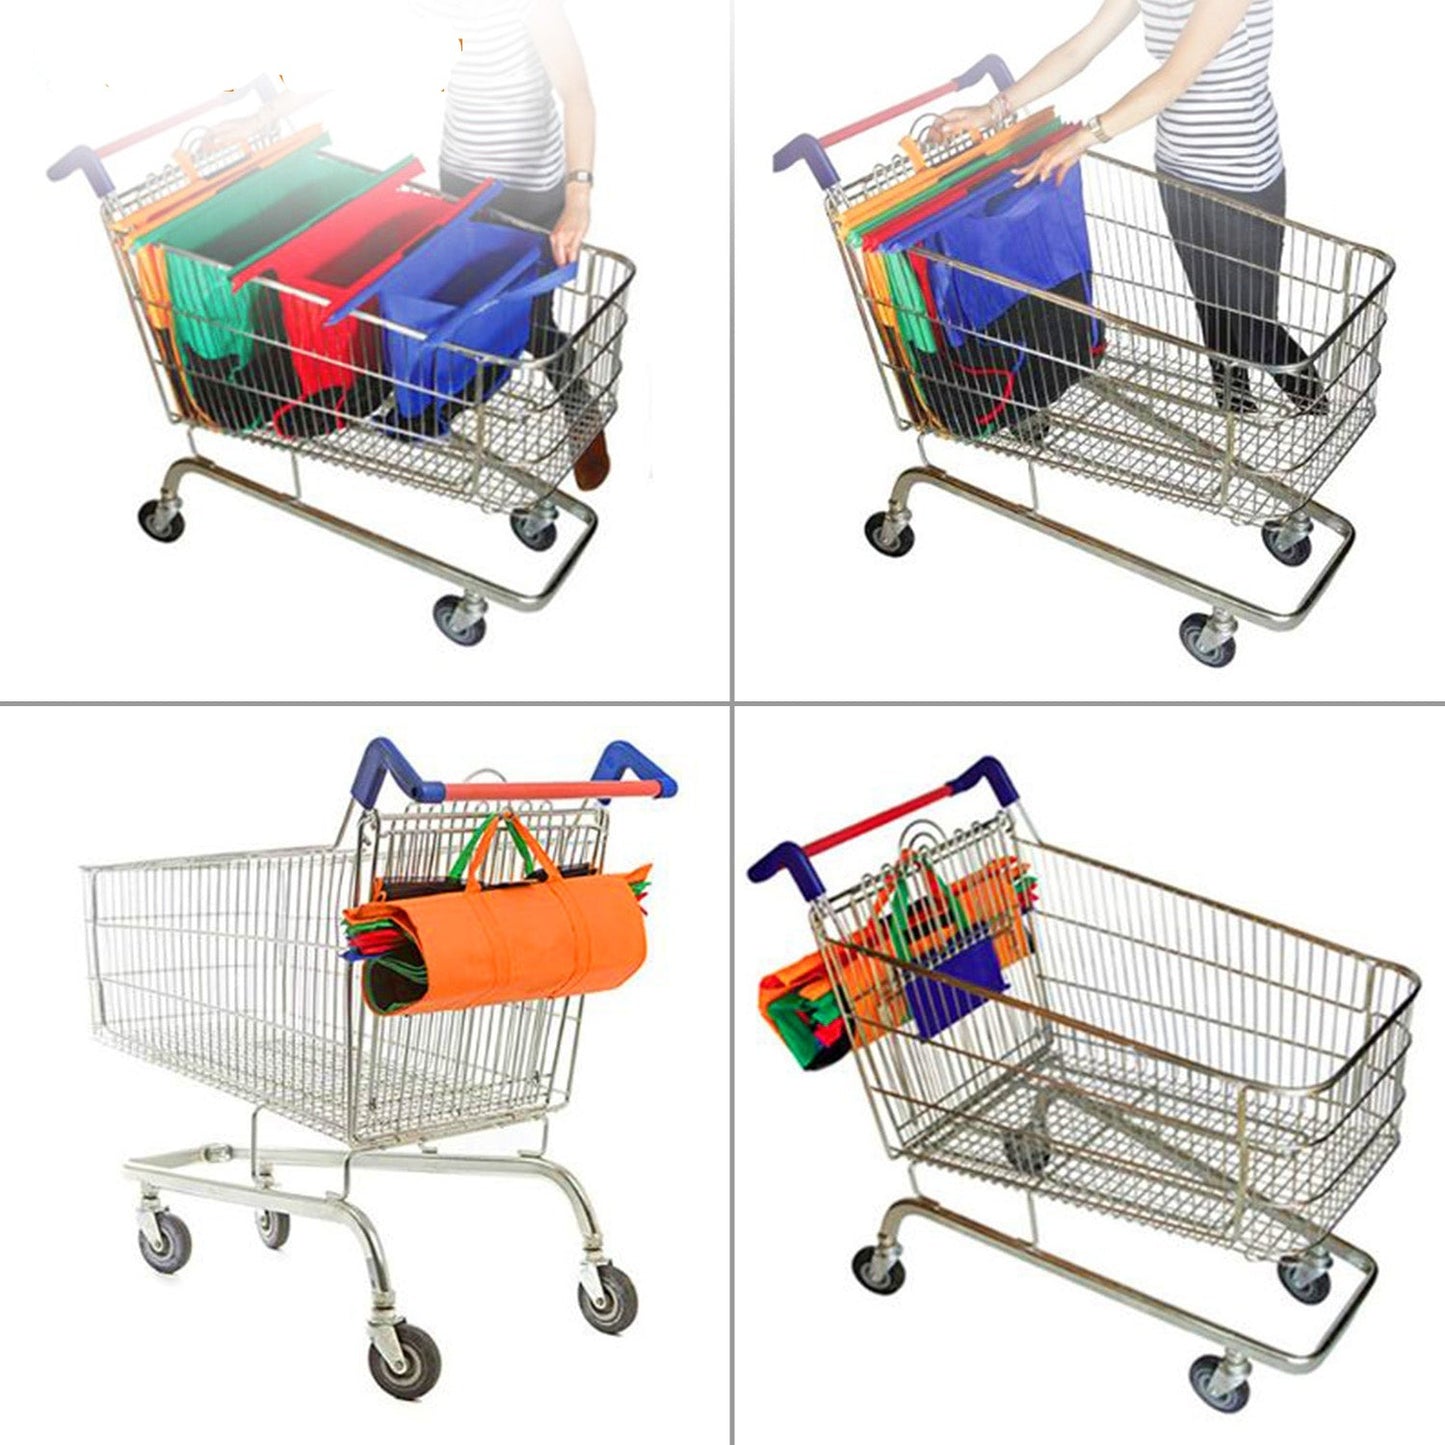 Reusable Shopping Trolley Bags (Set of 4)